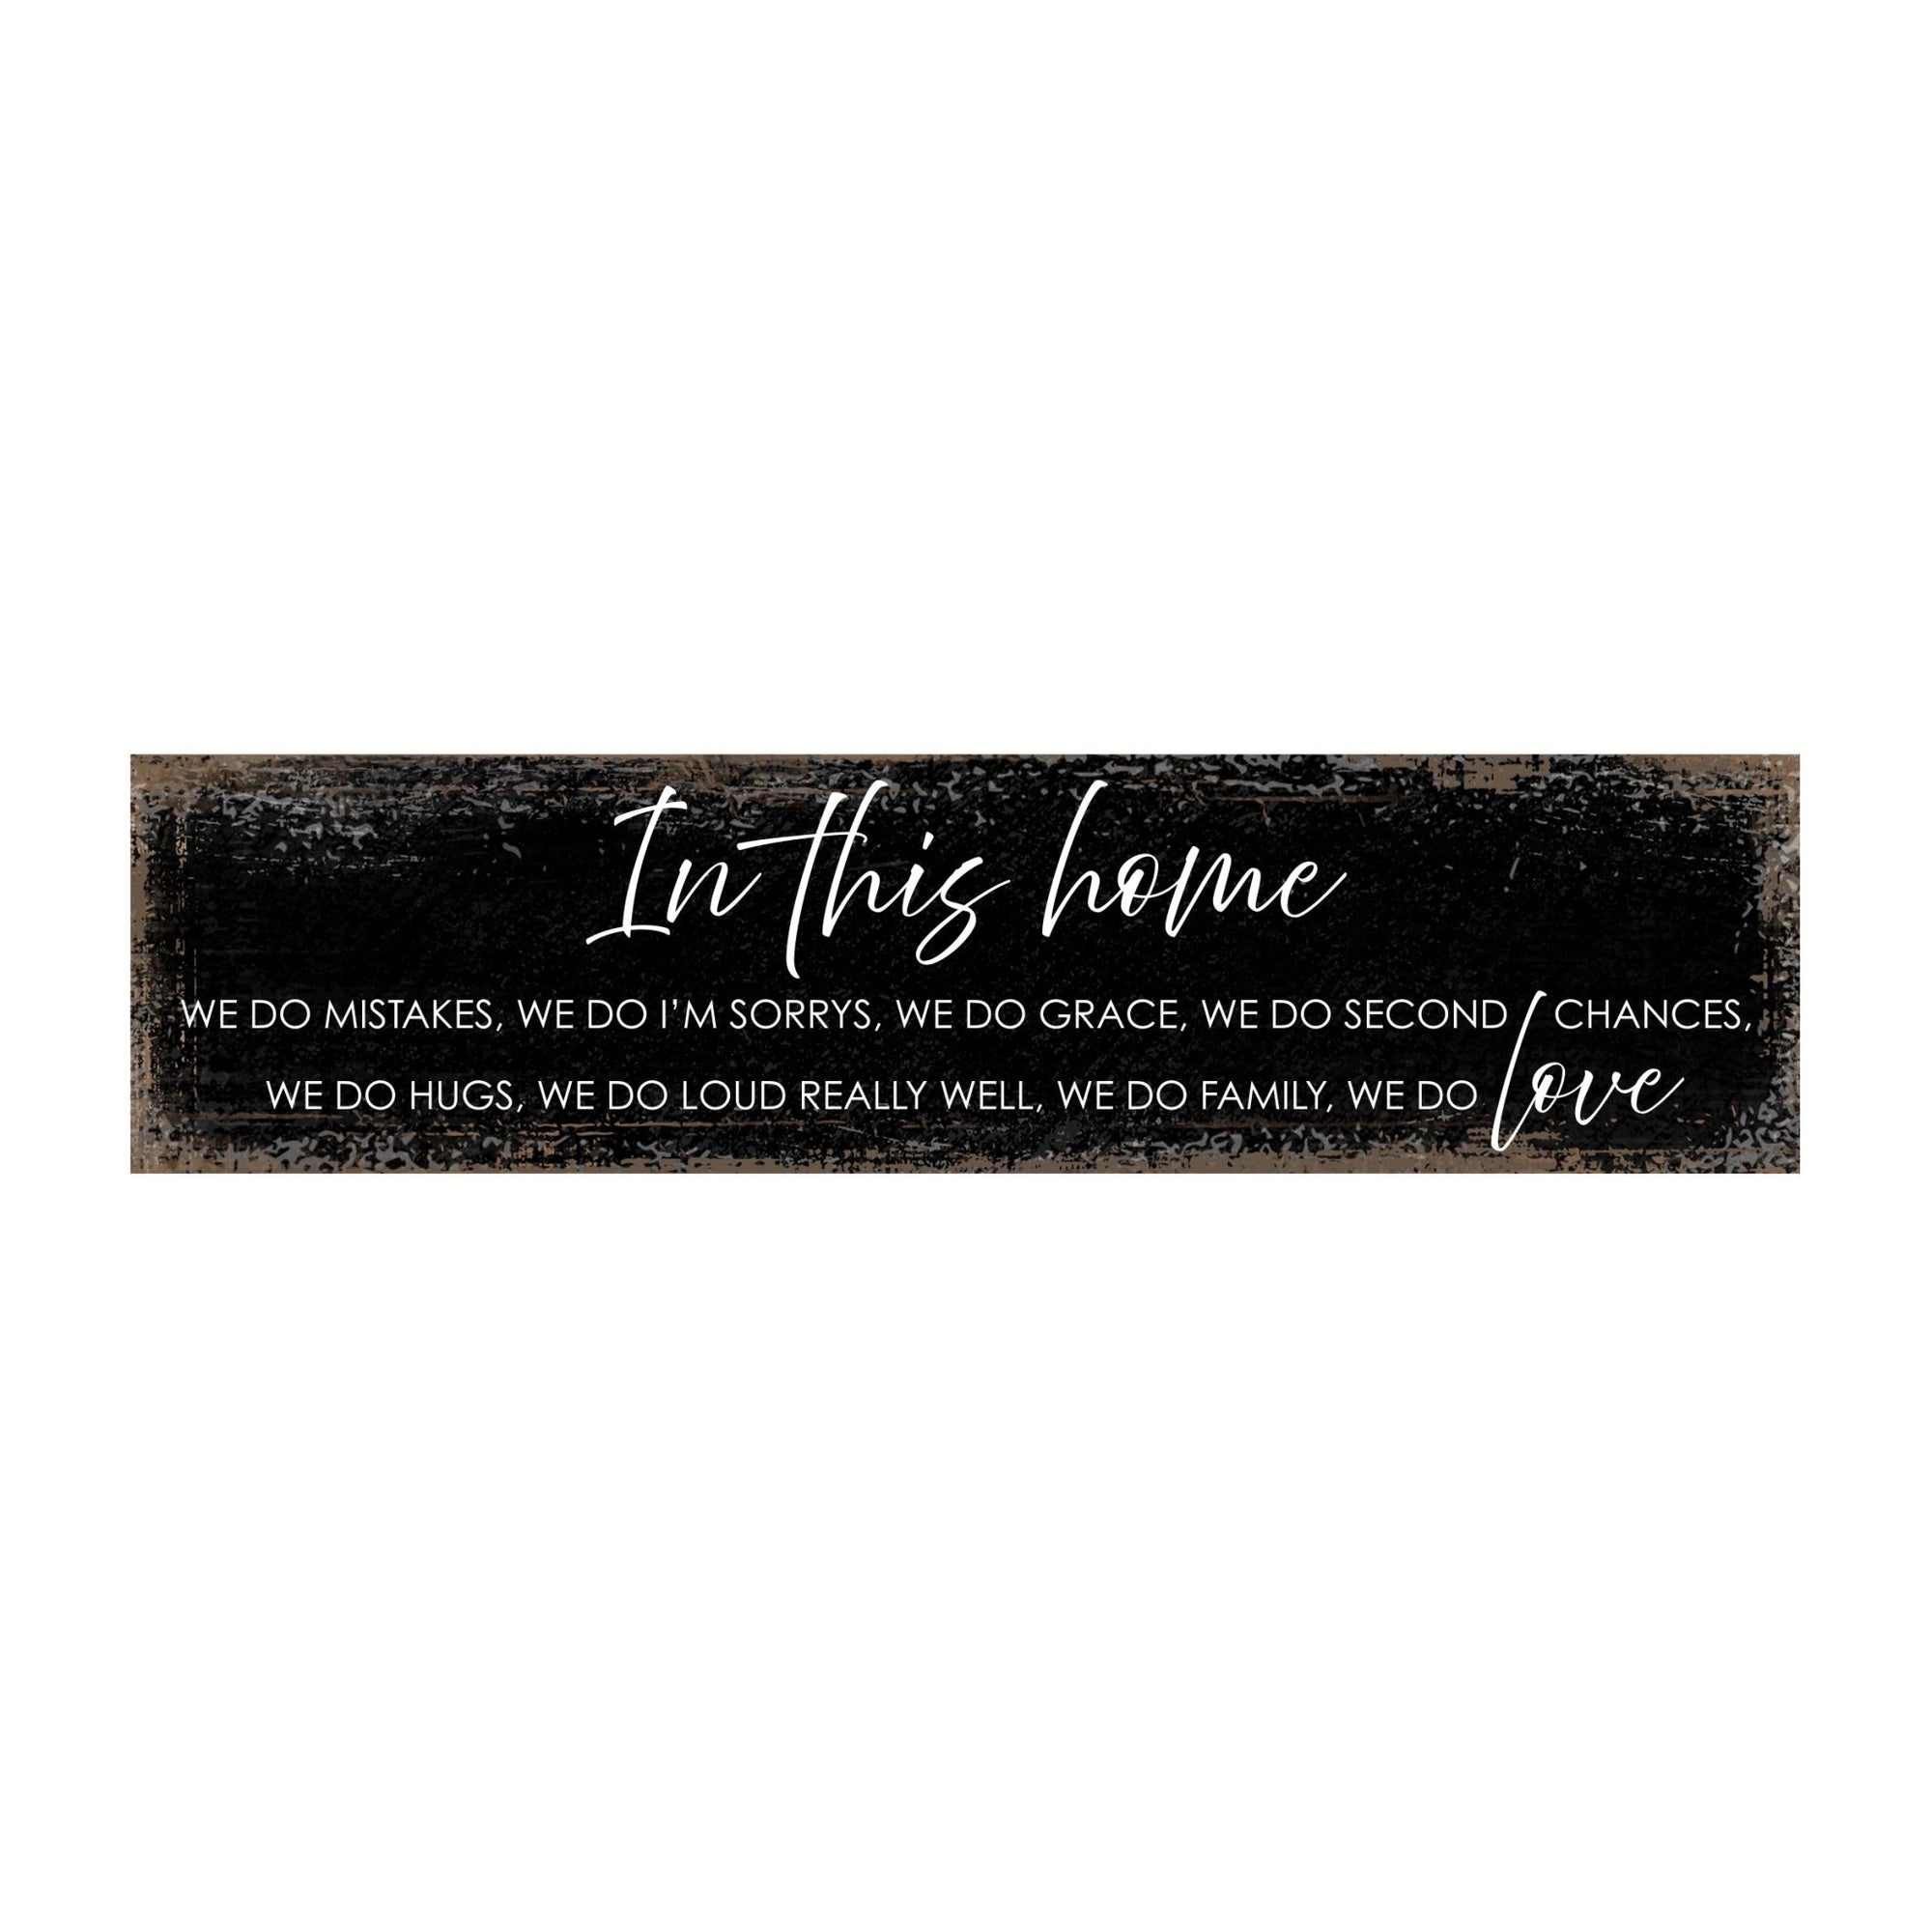 Modern Inspirational Wooden Wall Art Hanging Plaque 10x40 – In This Home – for Family and Home Decoration - LifeSong Milestones